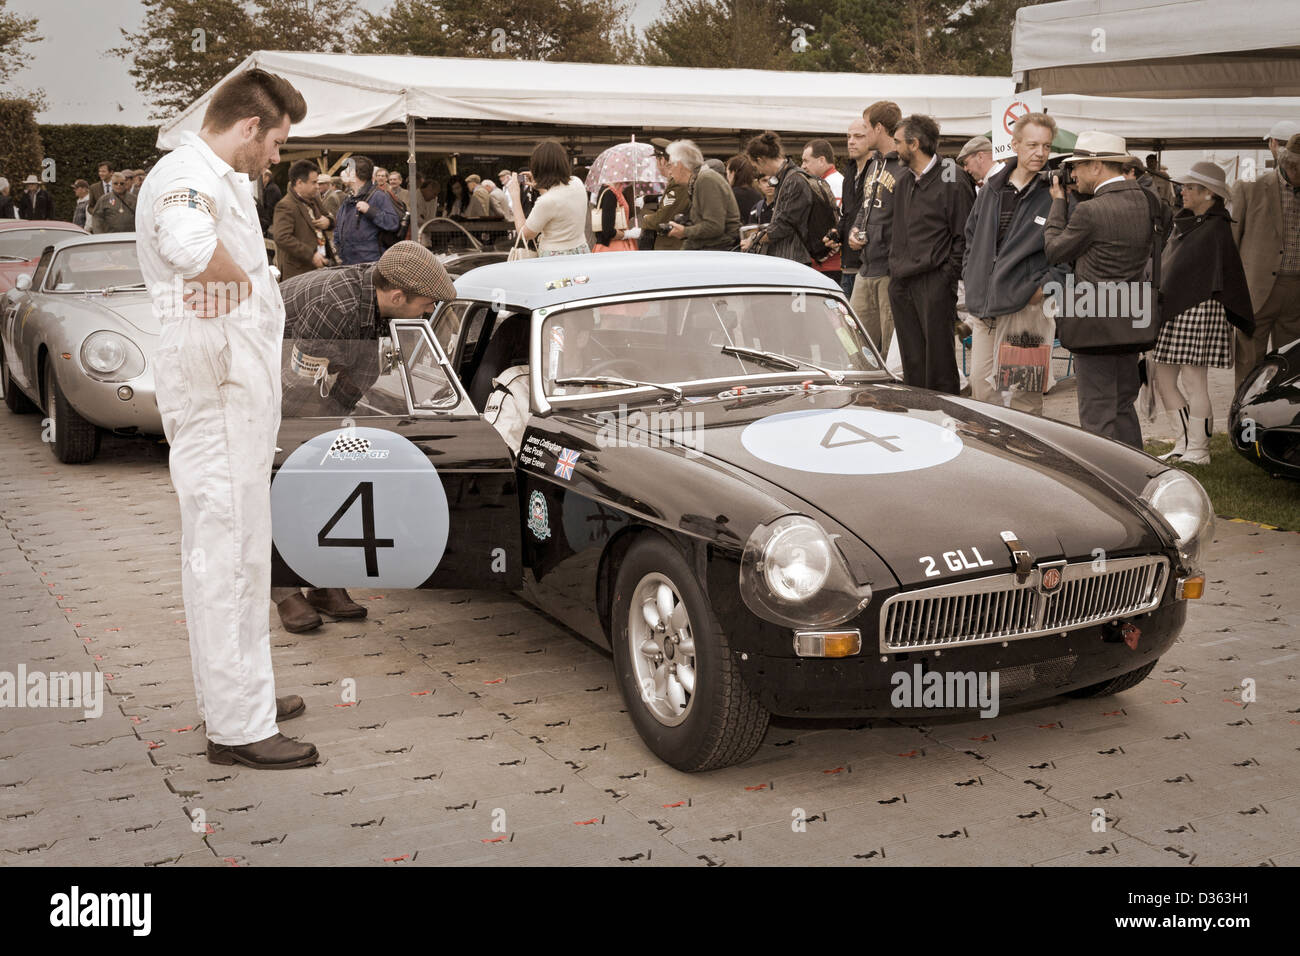 James Cottingham waits in the paddock in the1963 MGB at the 2012 Goodwood Revival, Sussex, UK. Stock Photo